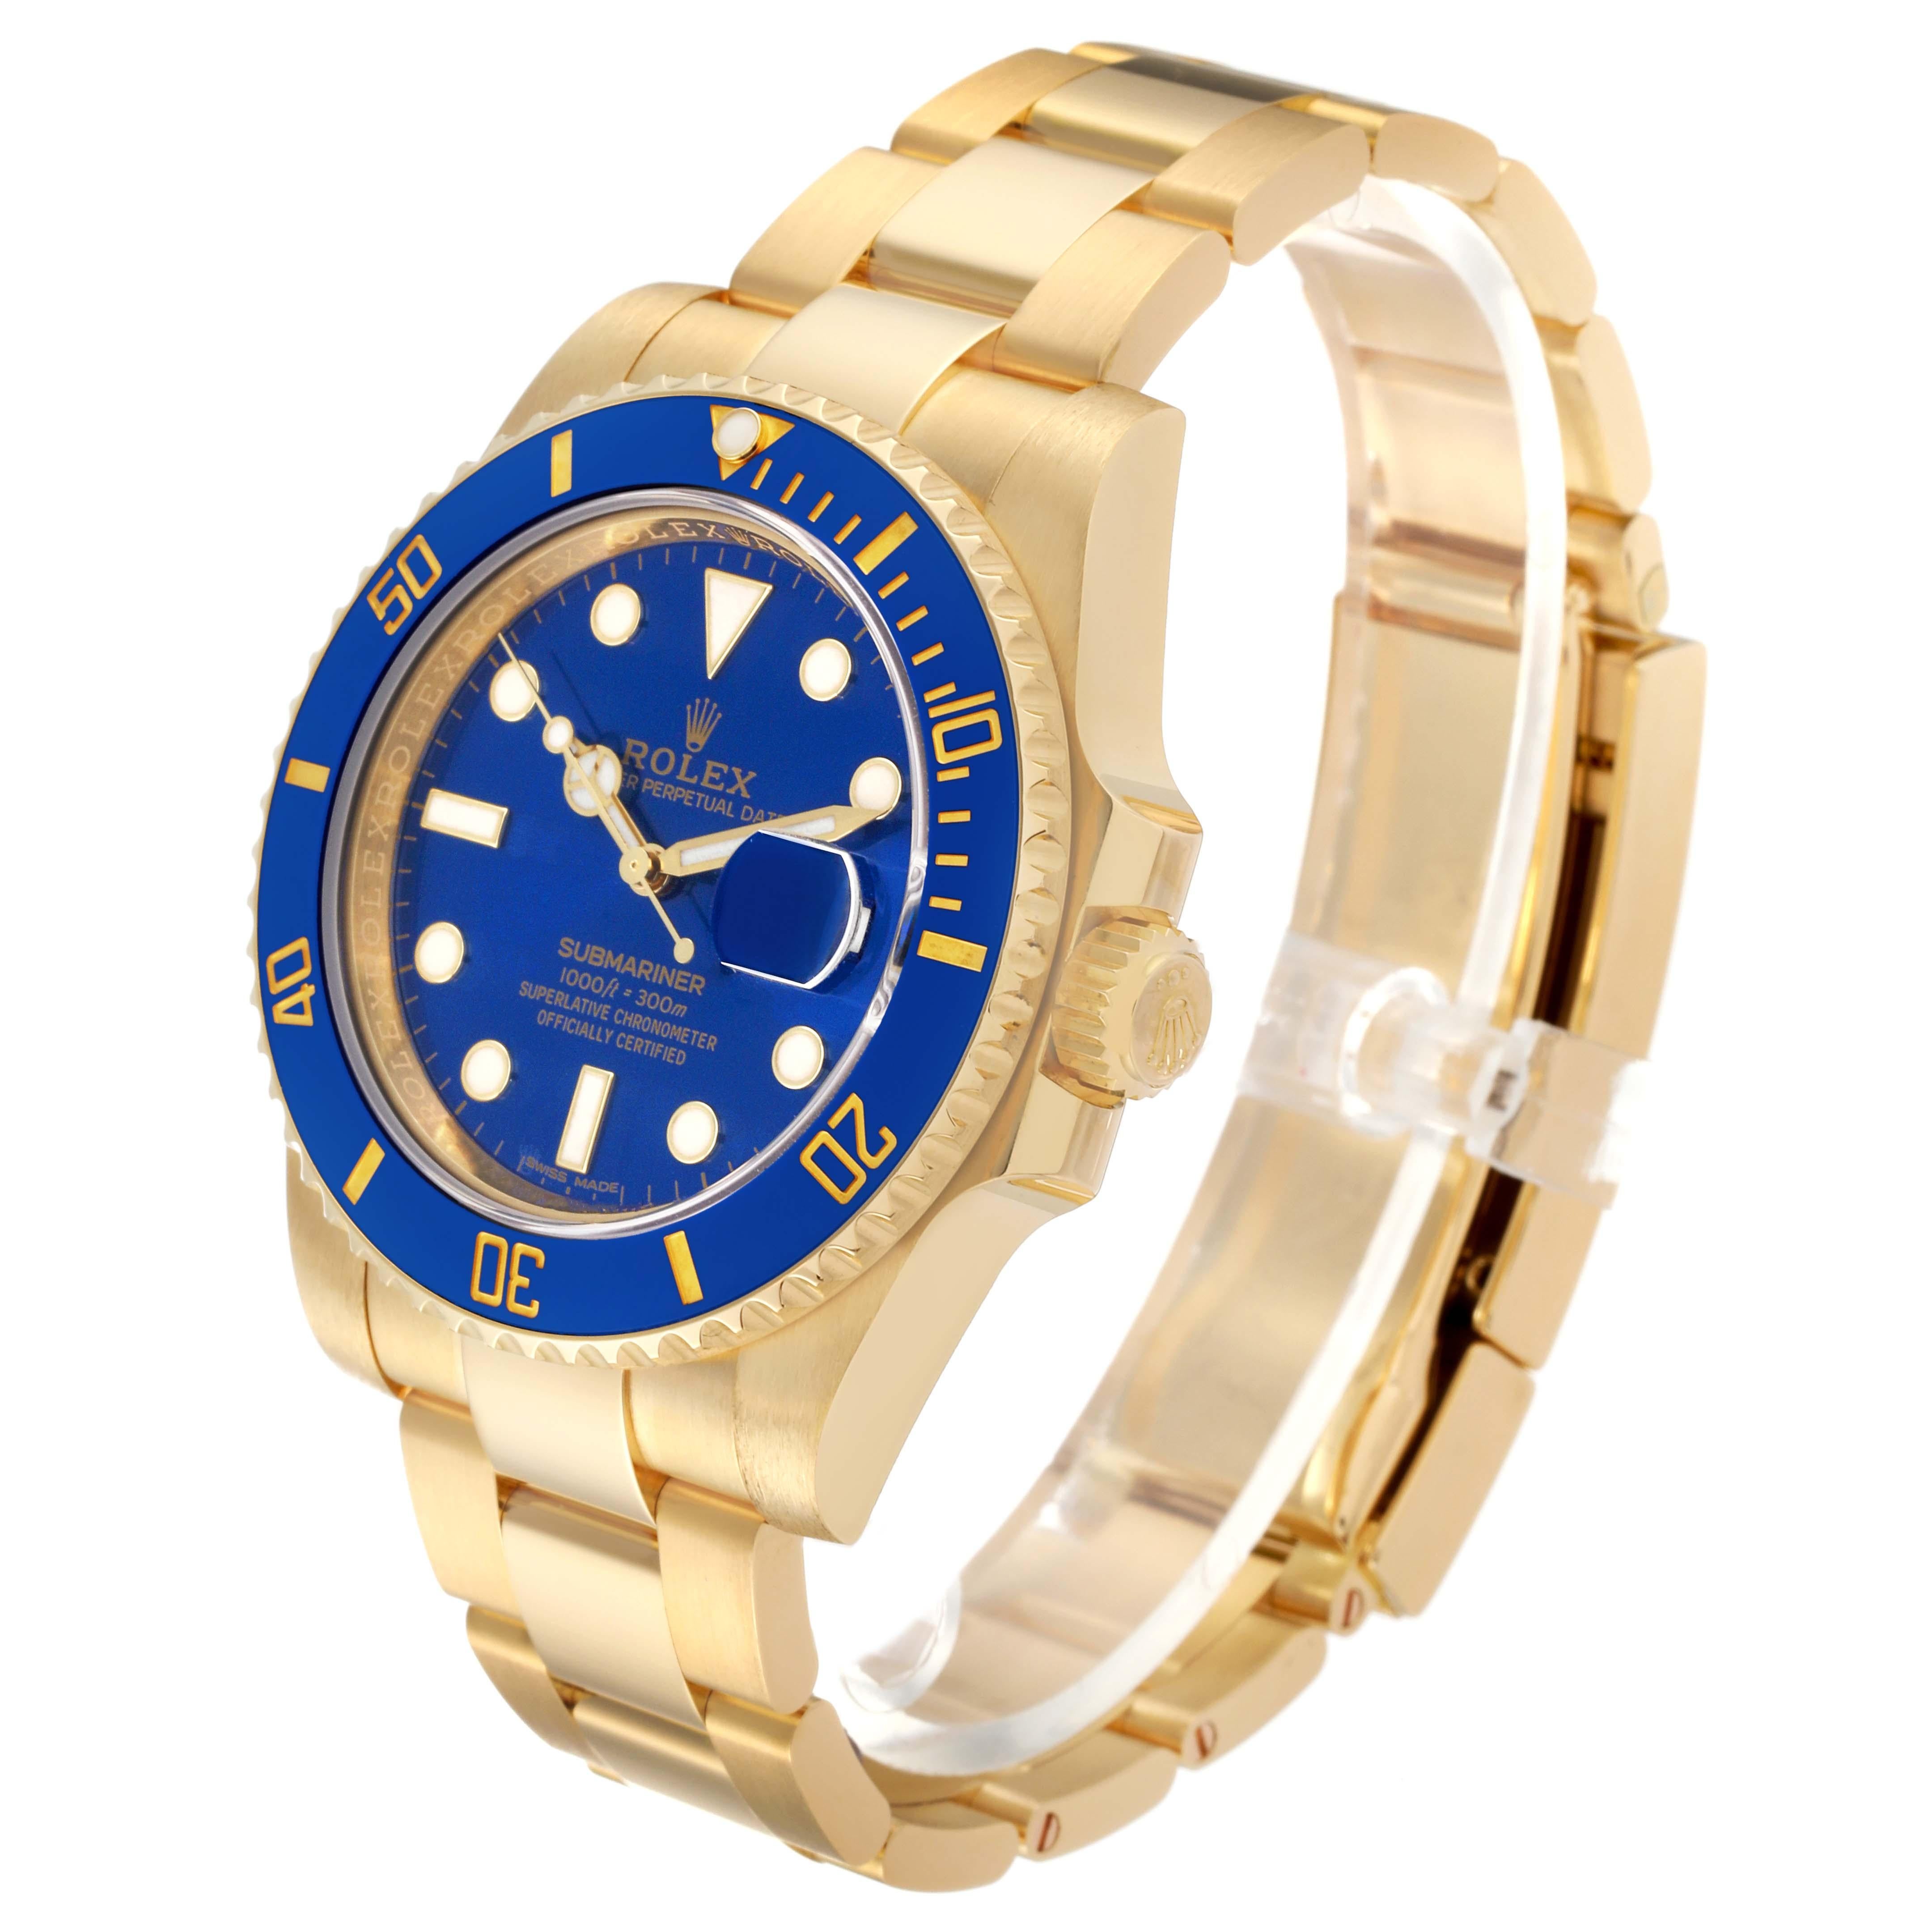 Rolex Submariner Yellow Gold Blue Dial Ceramic Bezel Mens Watch 116618 Box Card For Sale 7